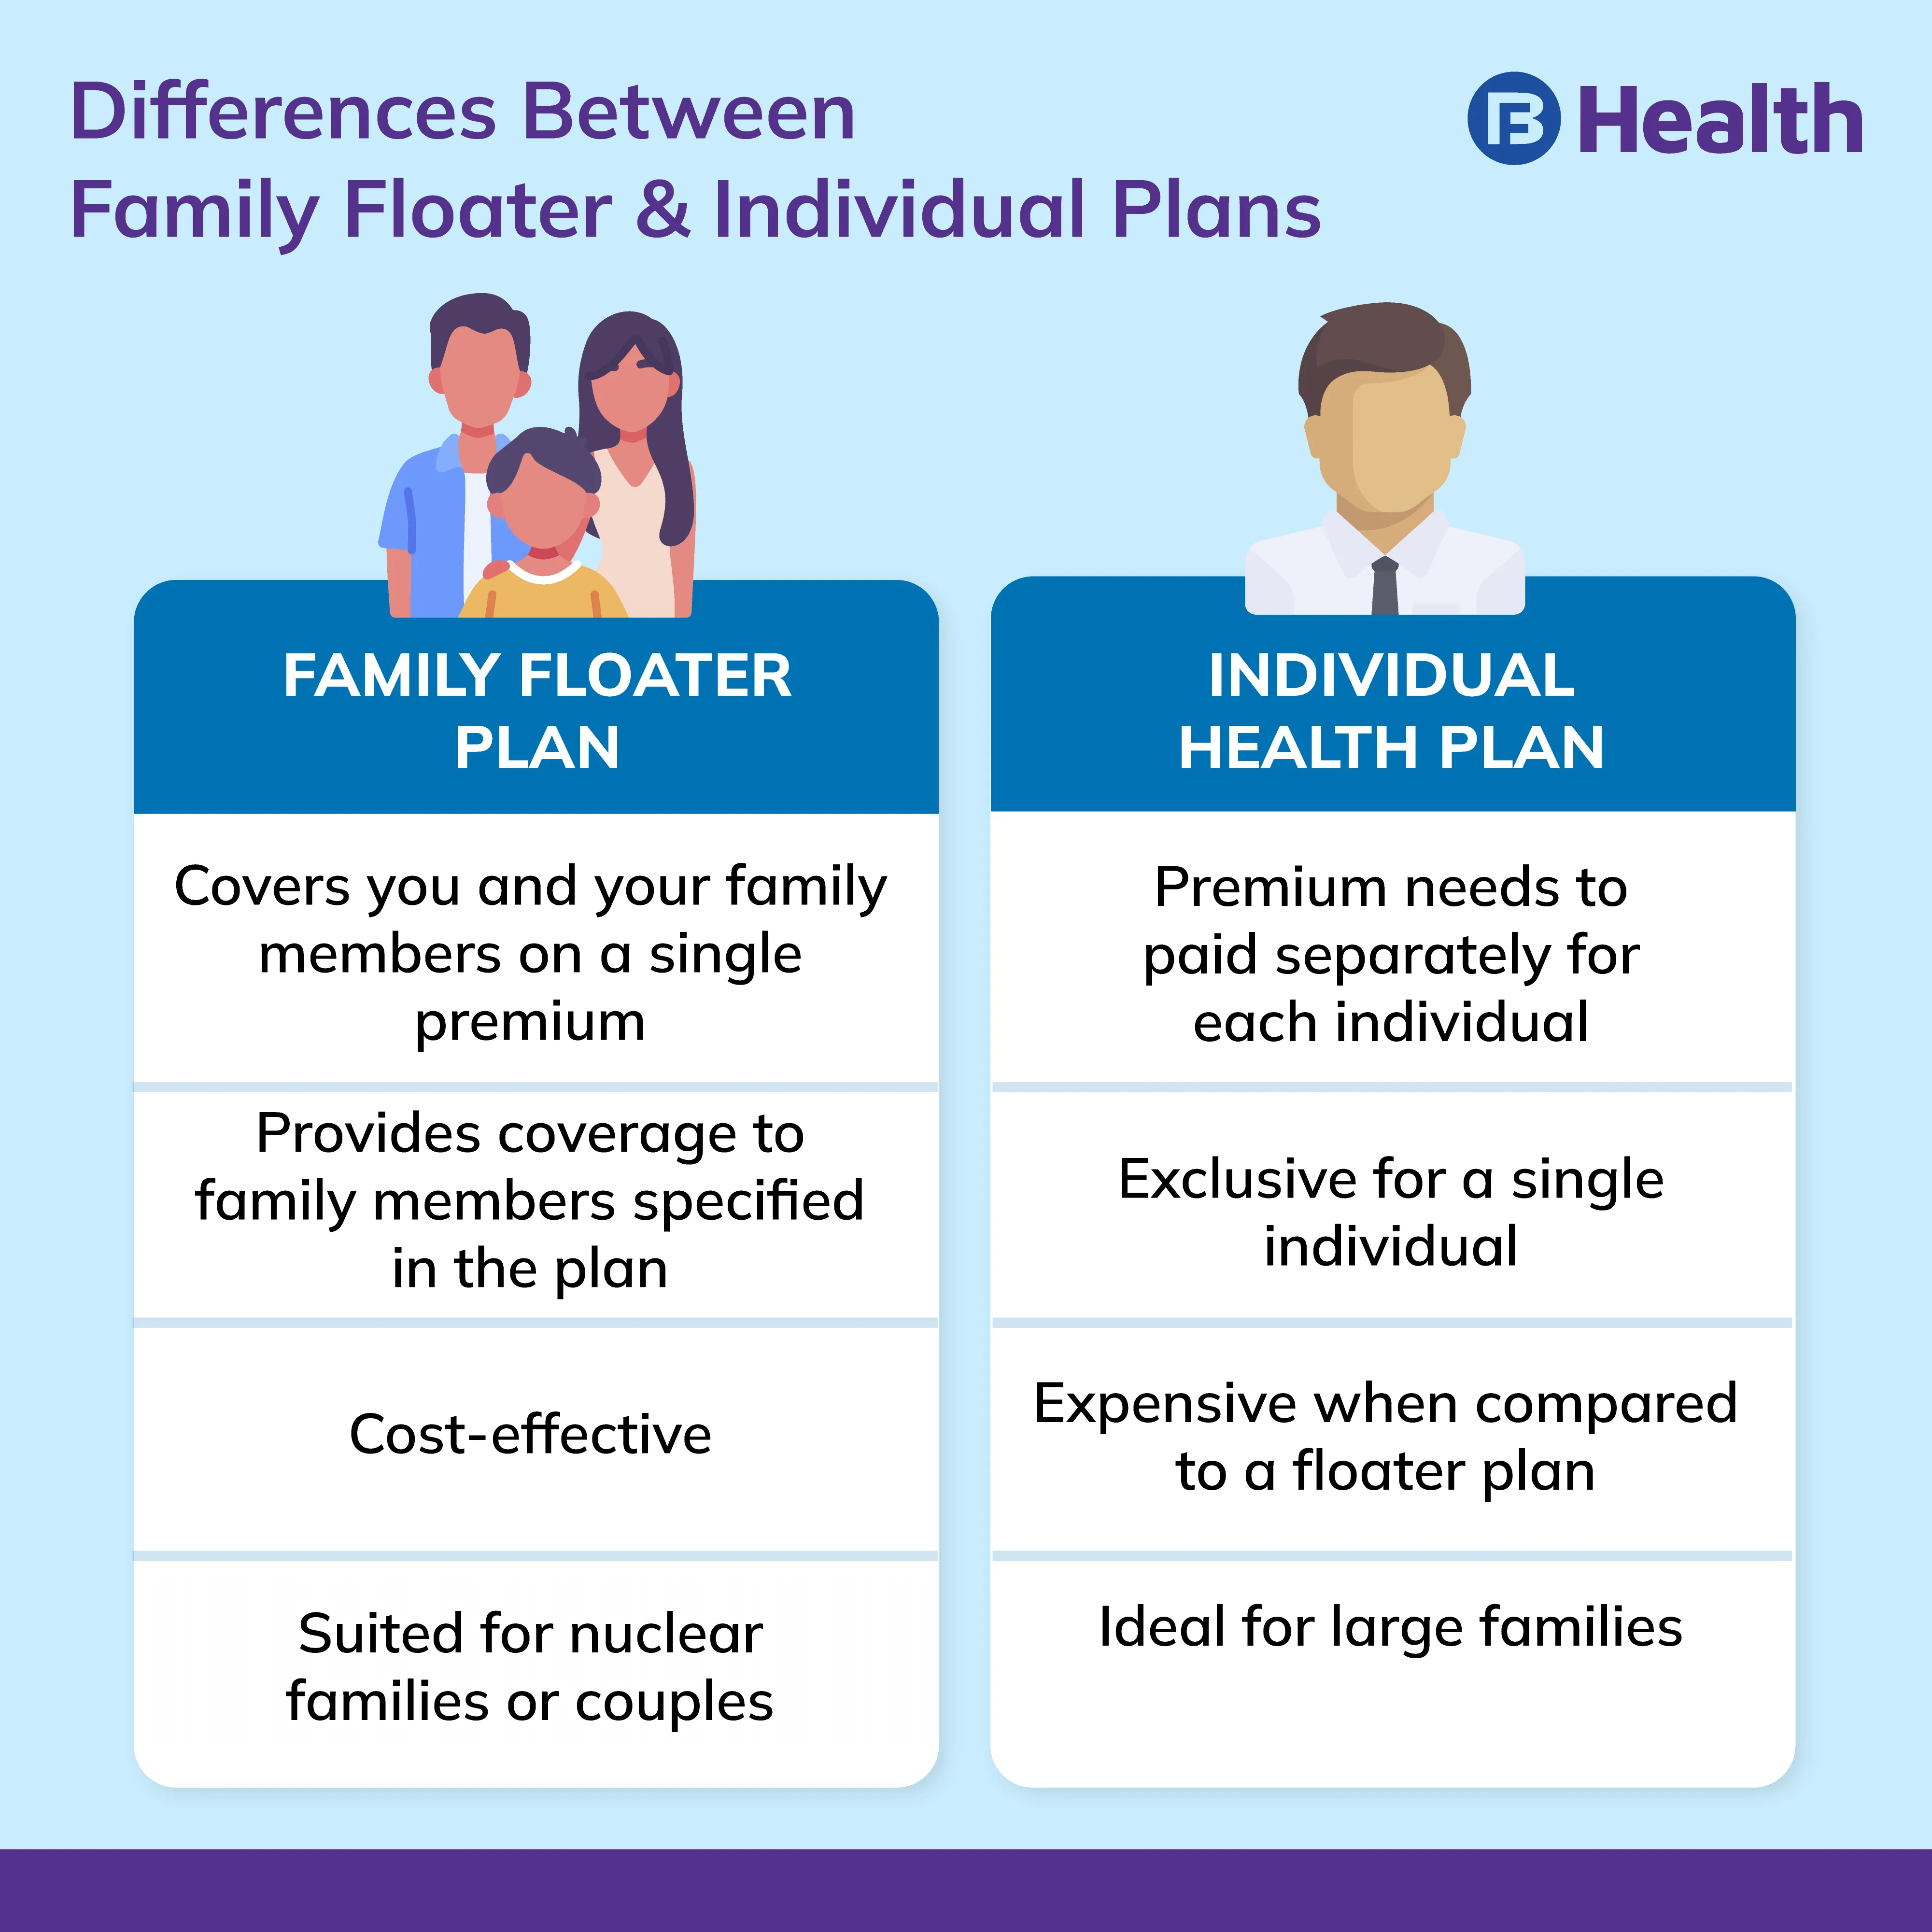 health insurance plan before marriage